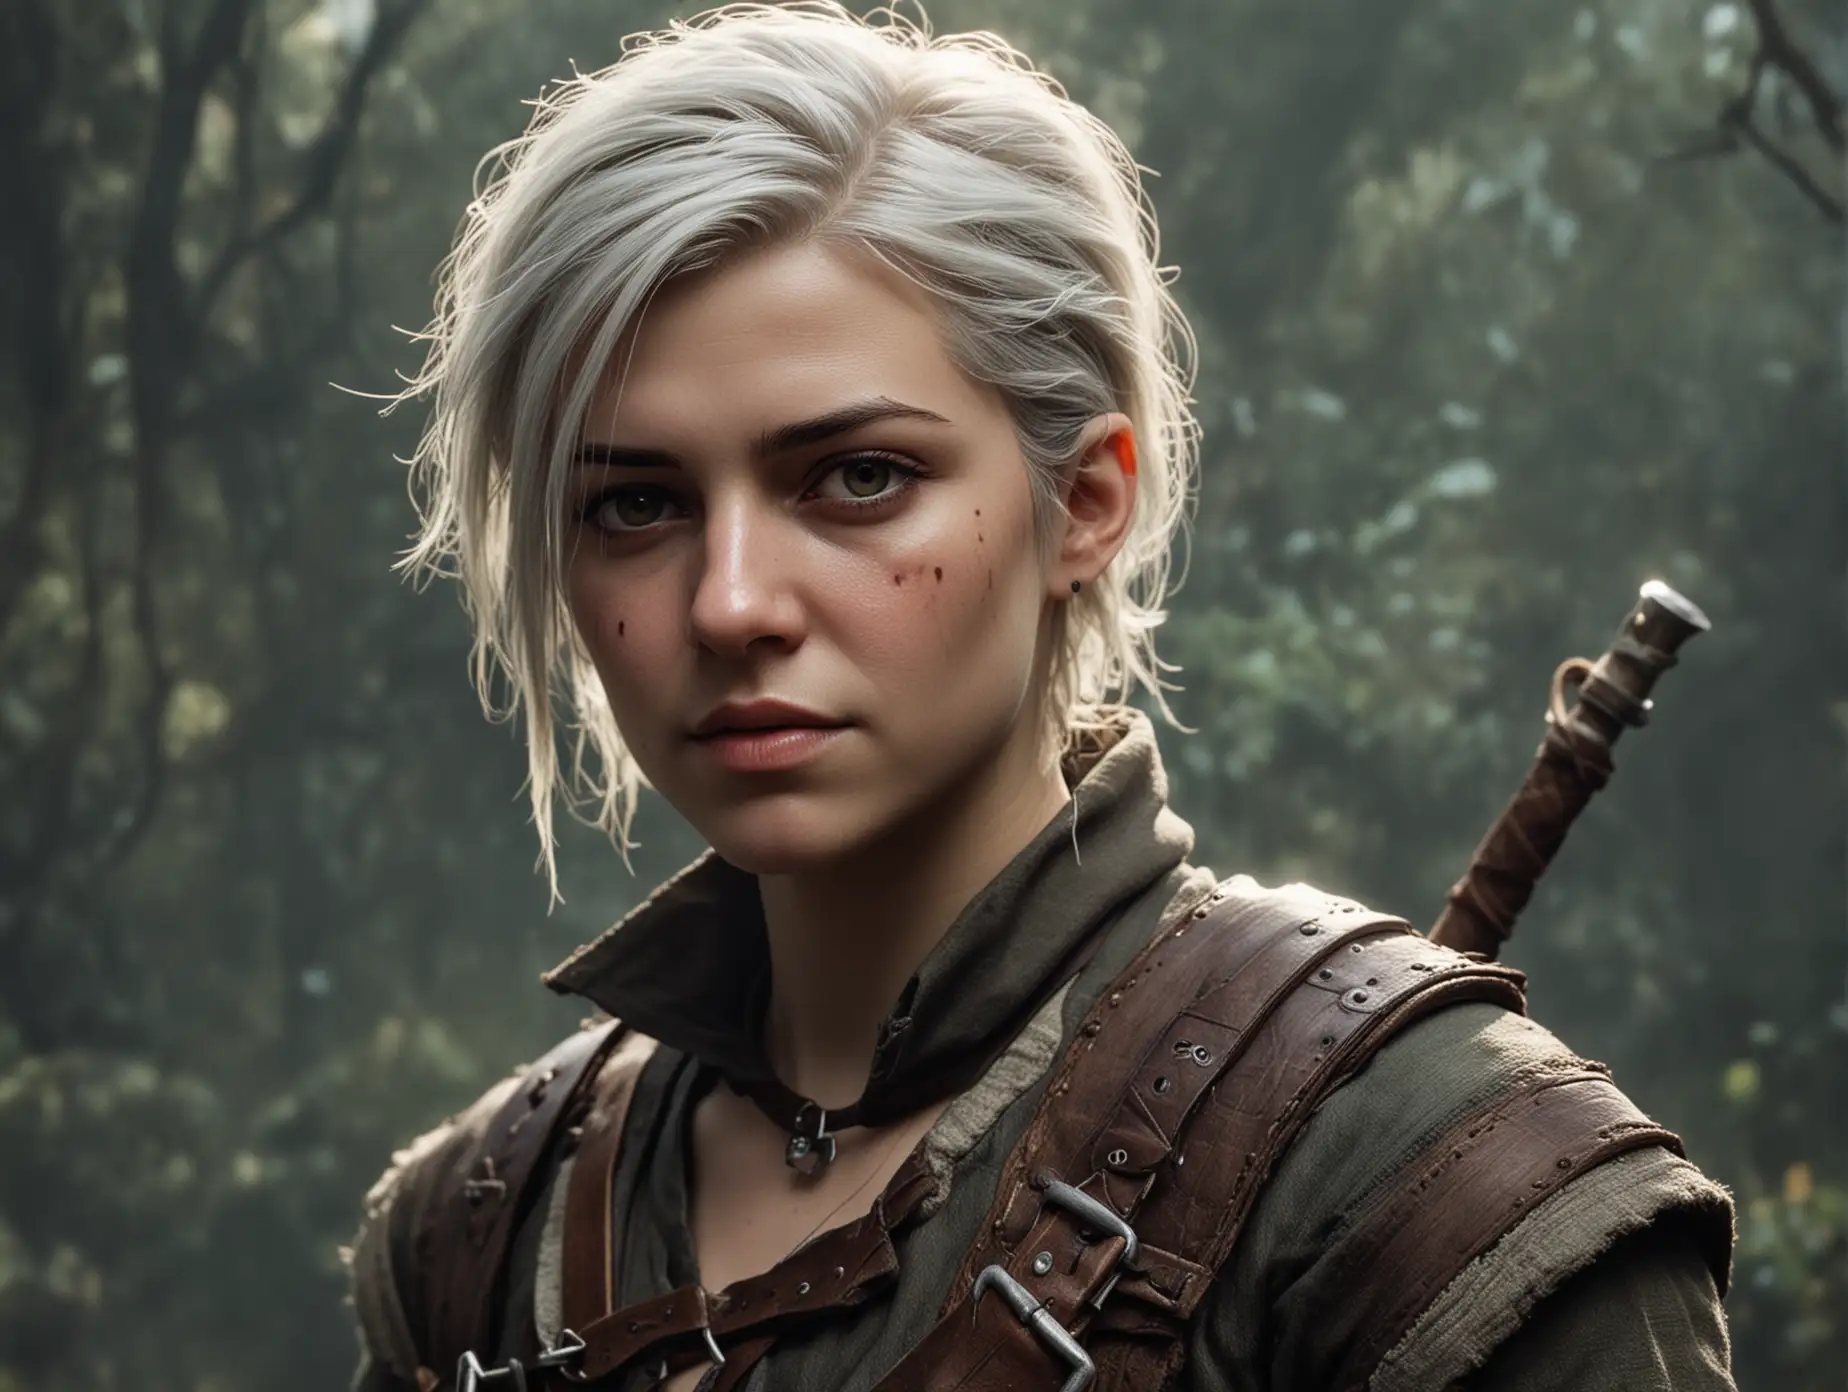 Rugged-Outlaw-Woman-Mistle-in-the-Witcher-Saga